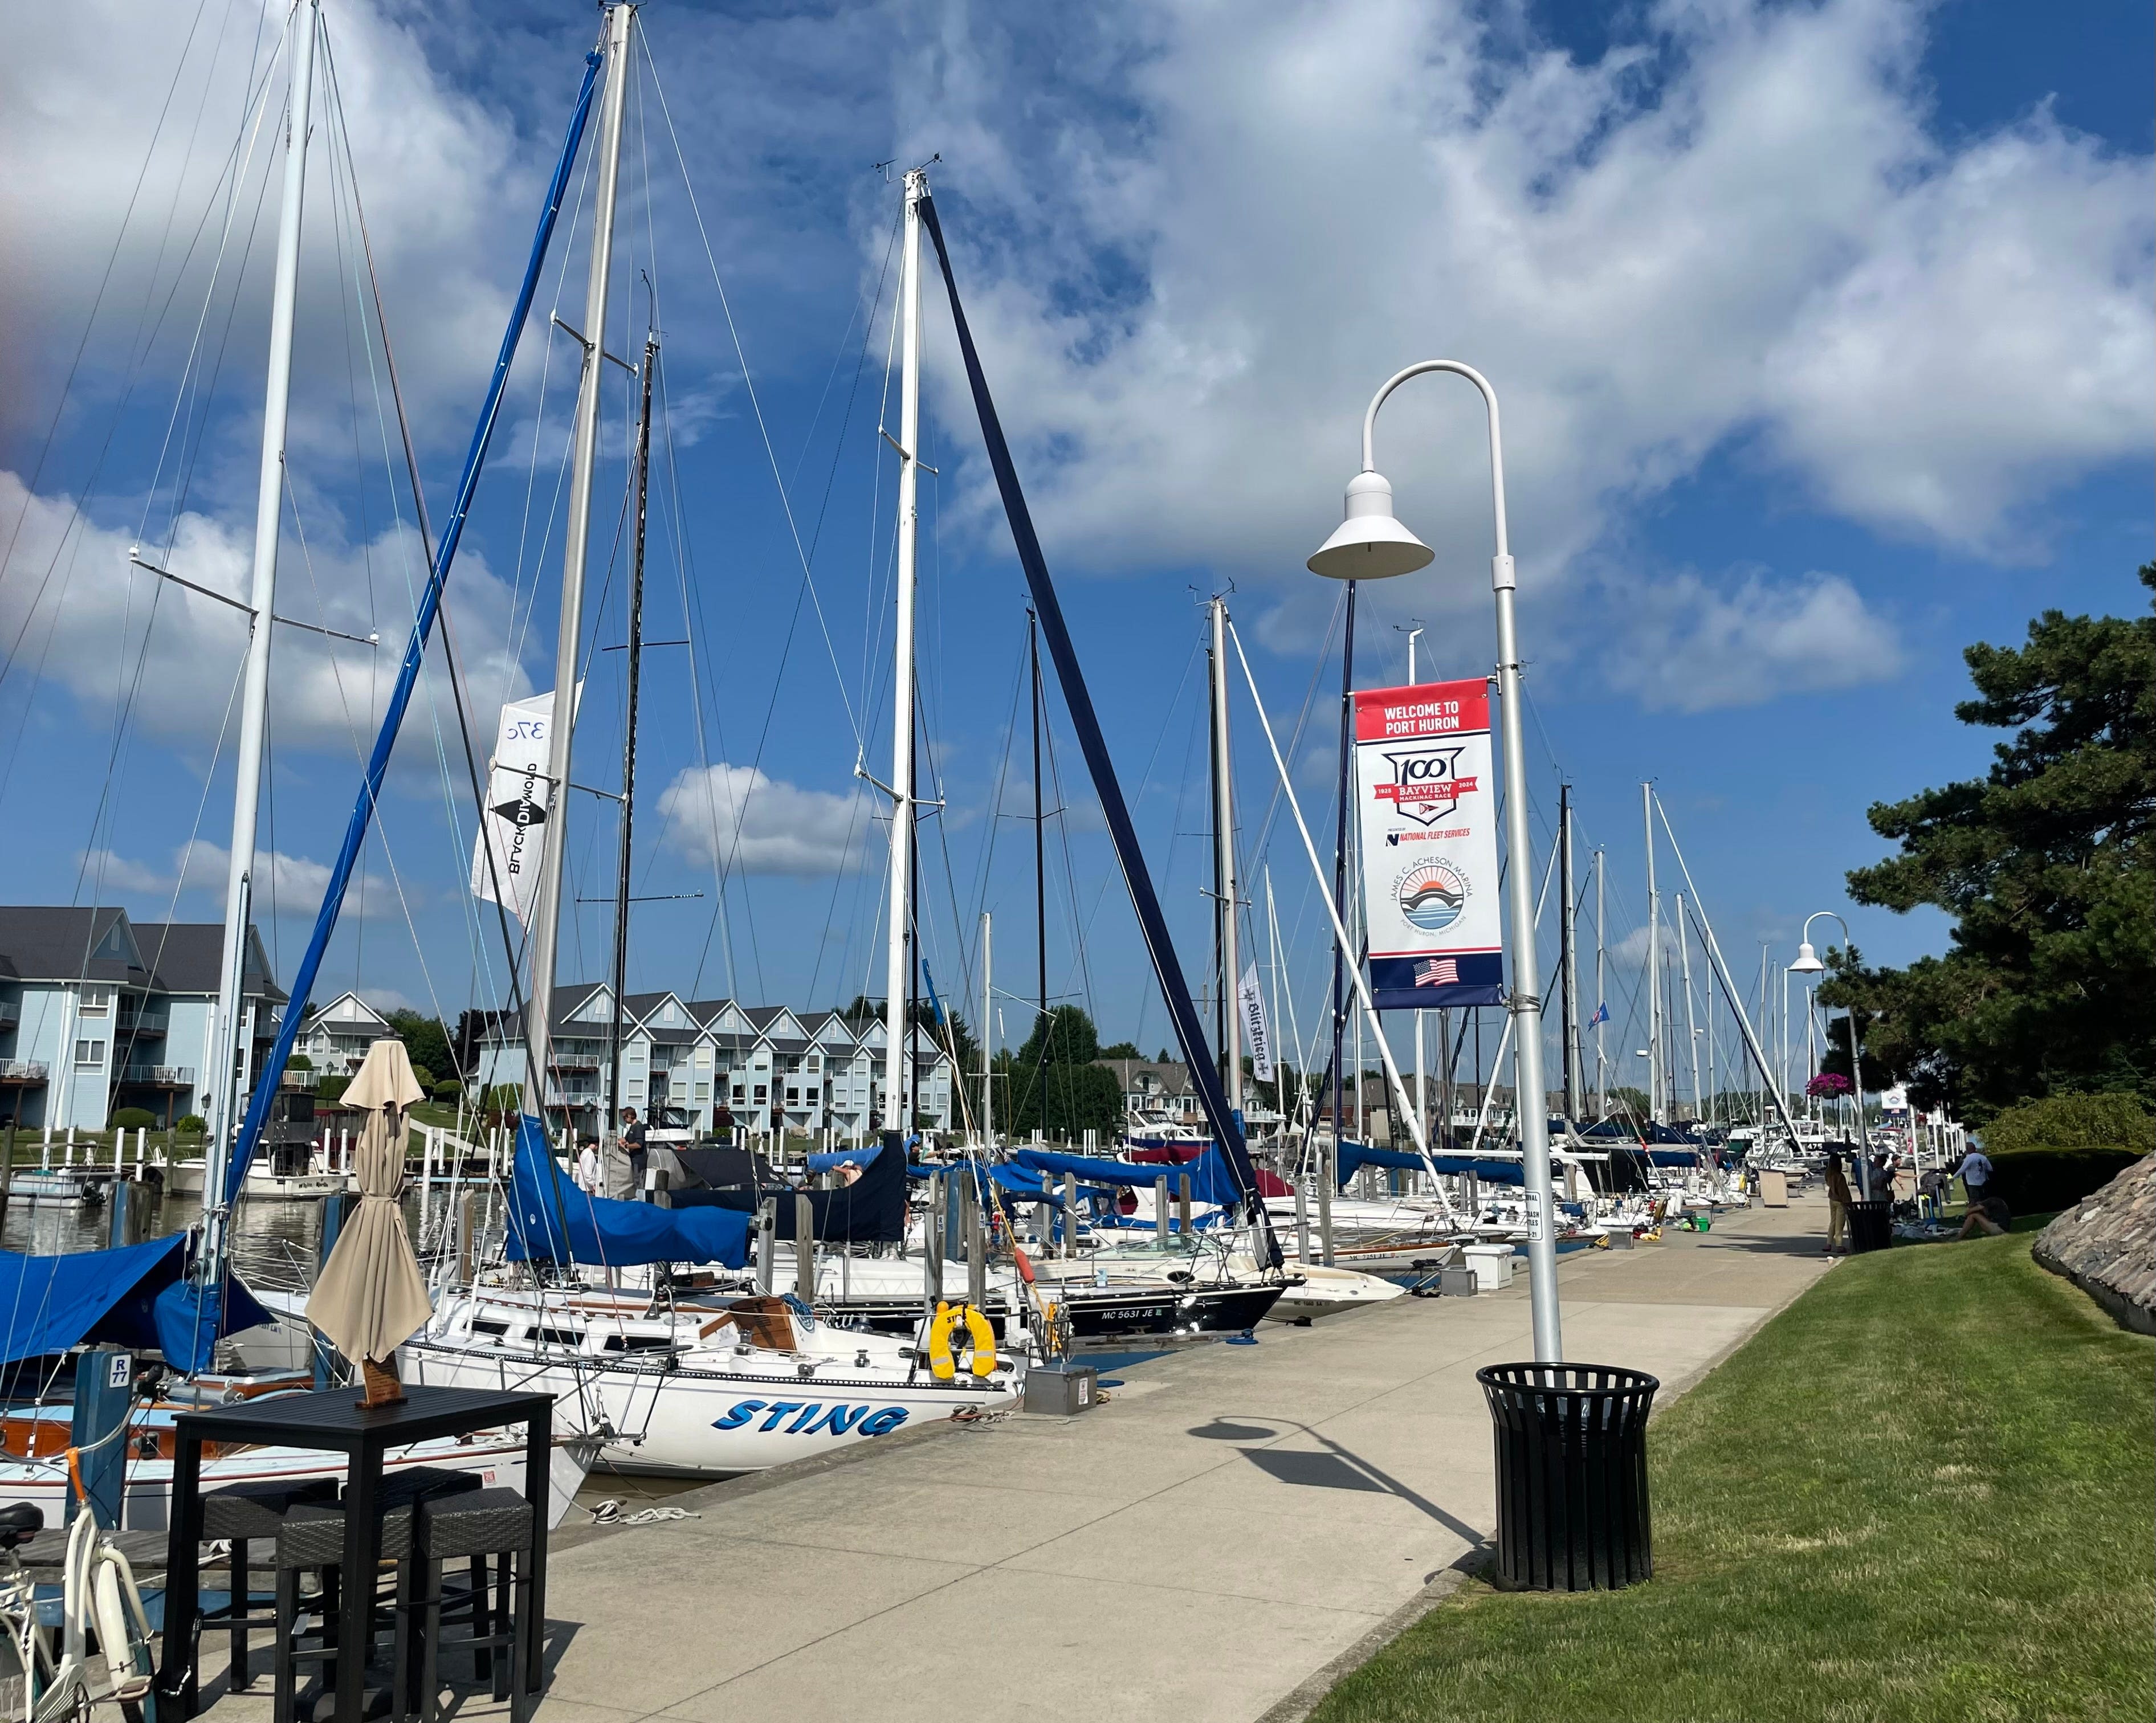 Here's where you can see boats before they take off for the 100th Port Huron-to-Mackinac Island Sailboat Race